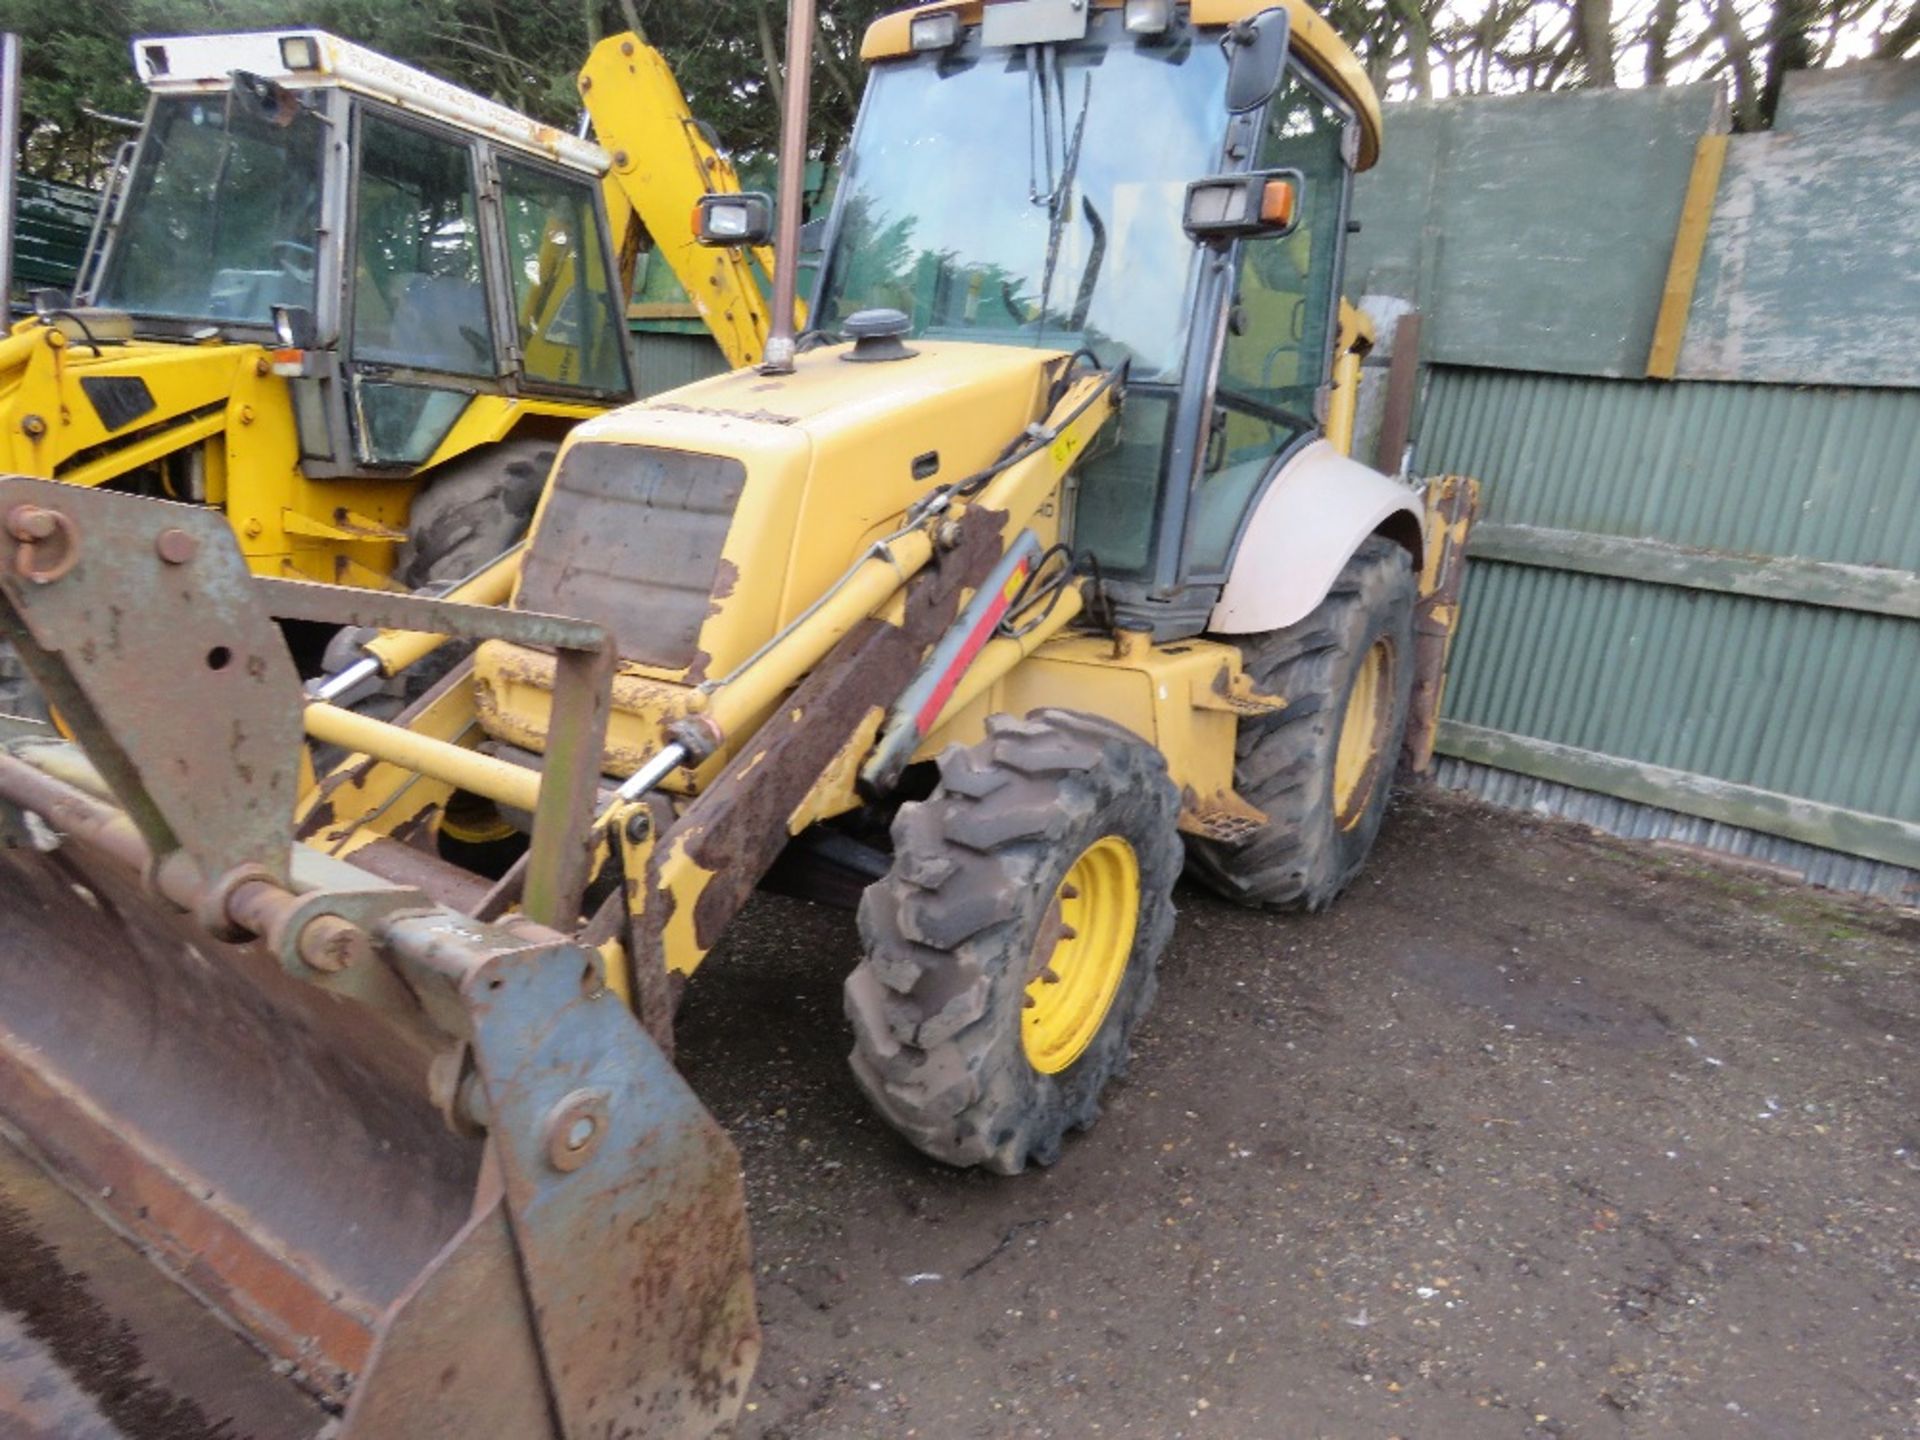 NEW HOLLAND 85 BACKHOE LOADER, REG: R978 JBJ. 8542 REC HOURS. WITH 4IN1 BUCKET AND ONE REAR BUCKET. - Image 5 of 10